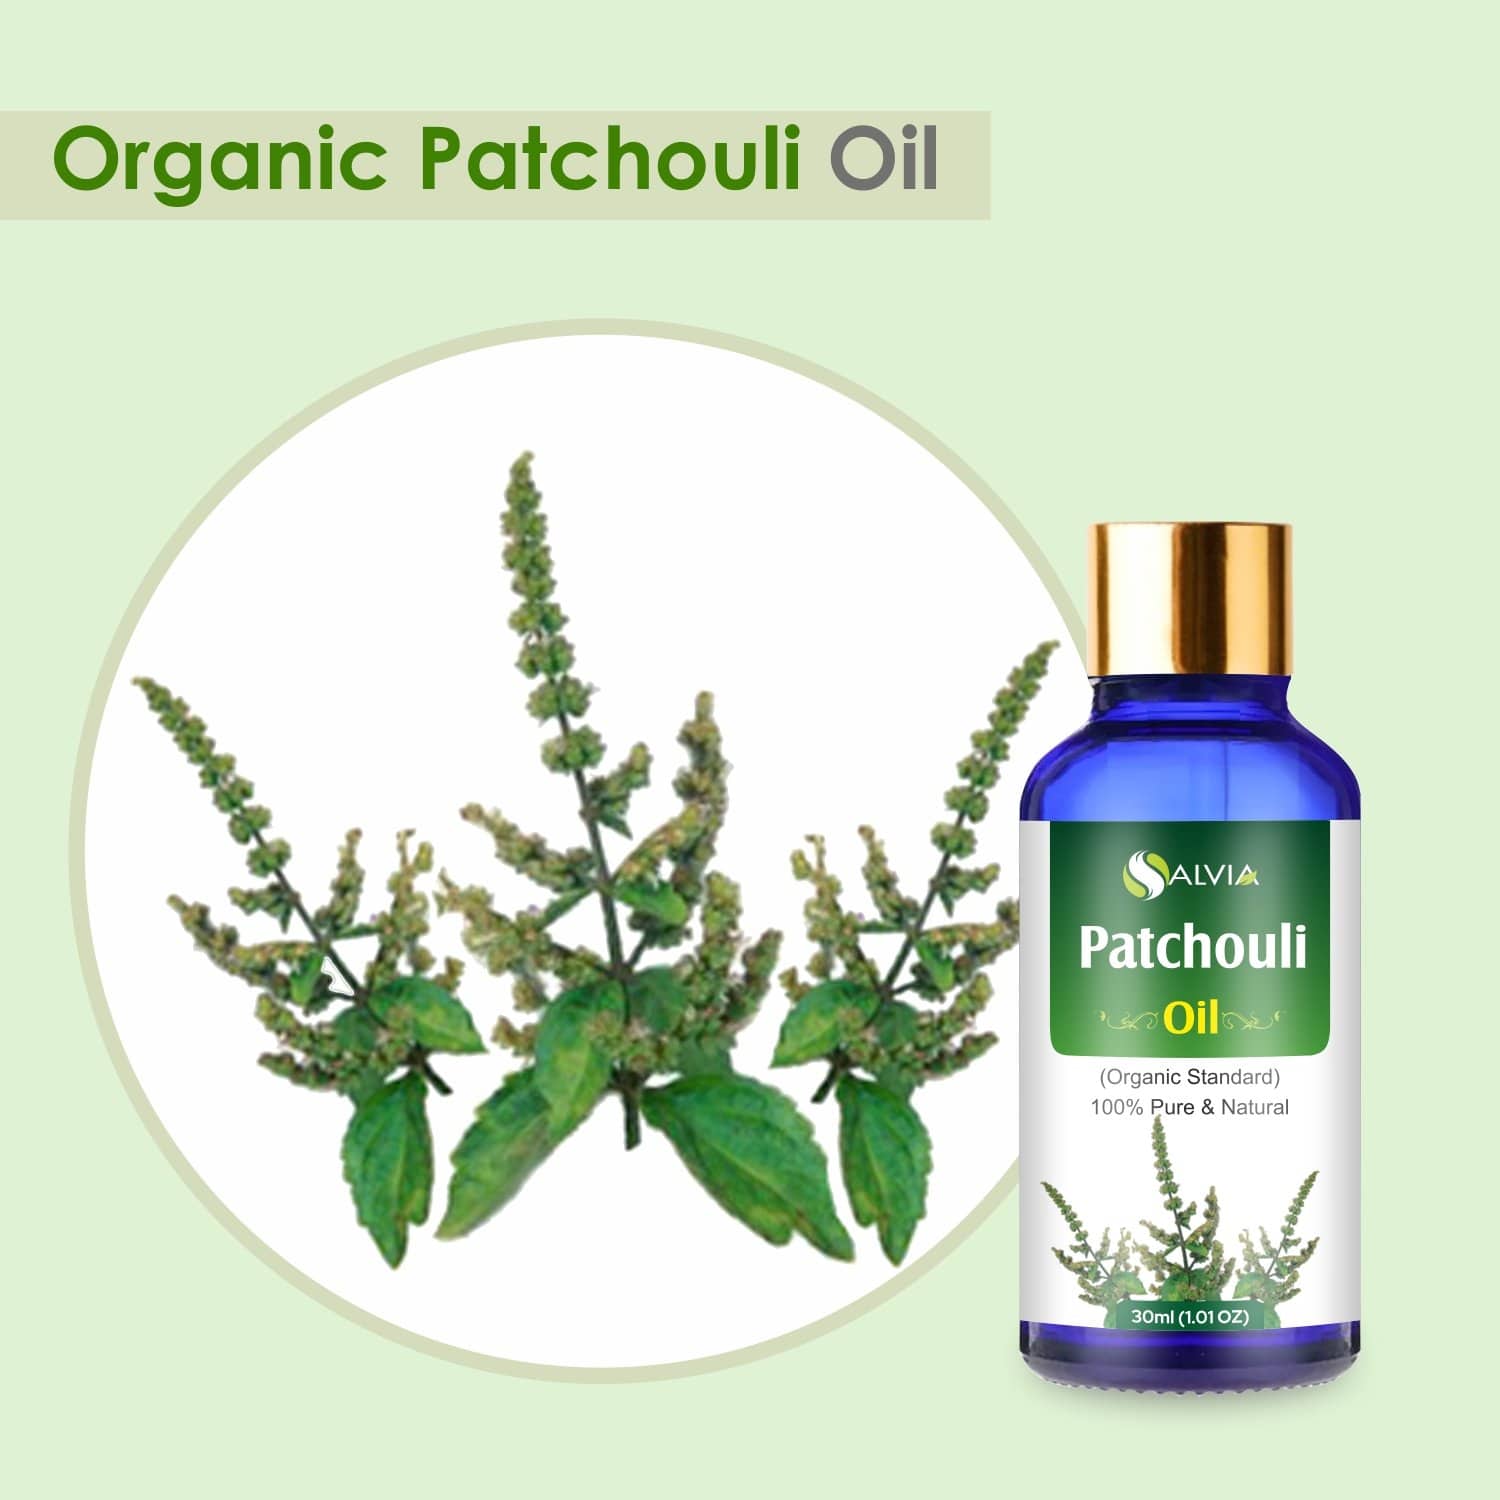 Organic Patchouli Essential Oil uses